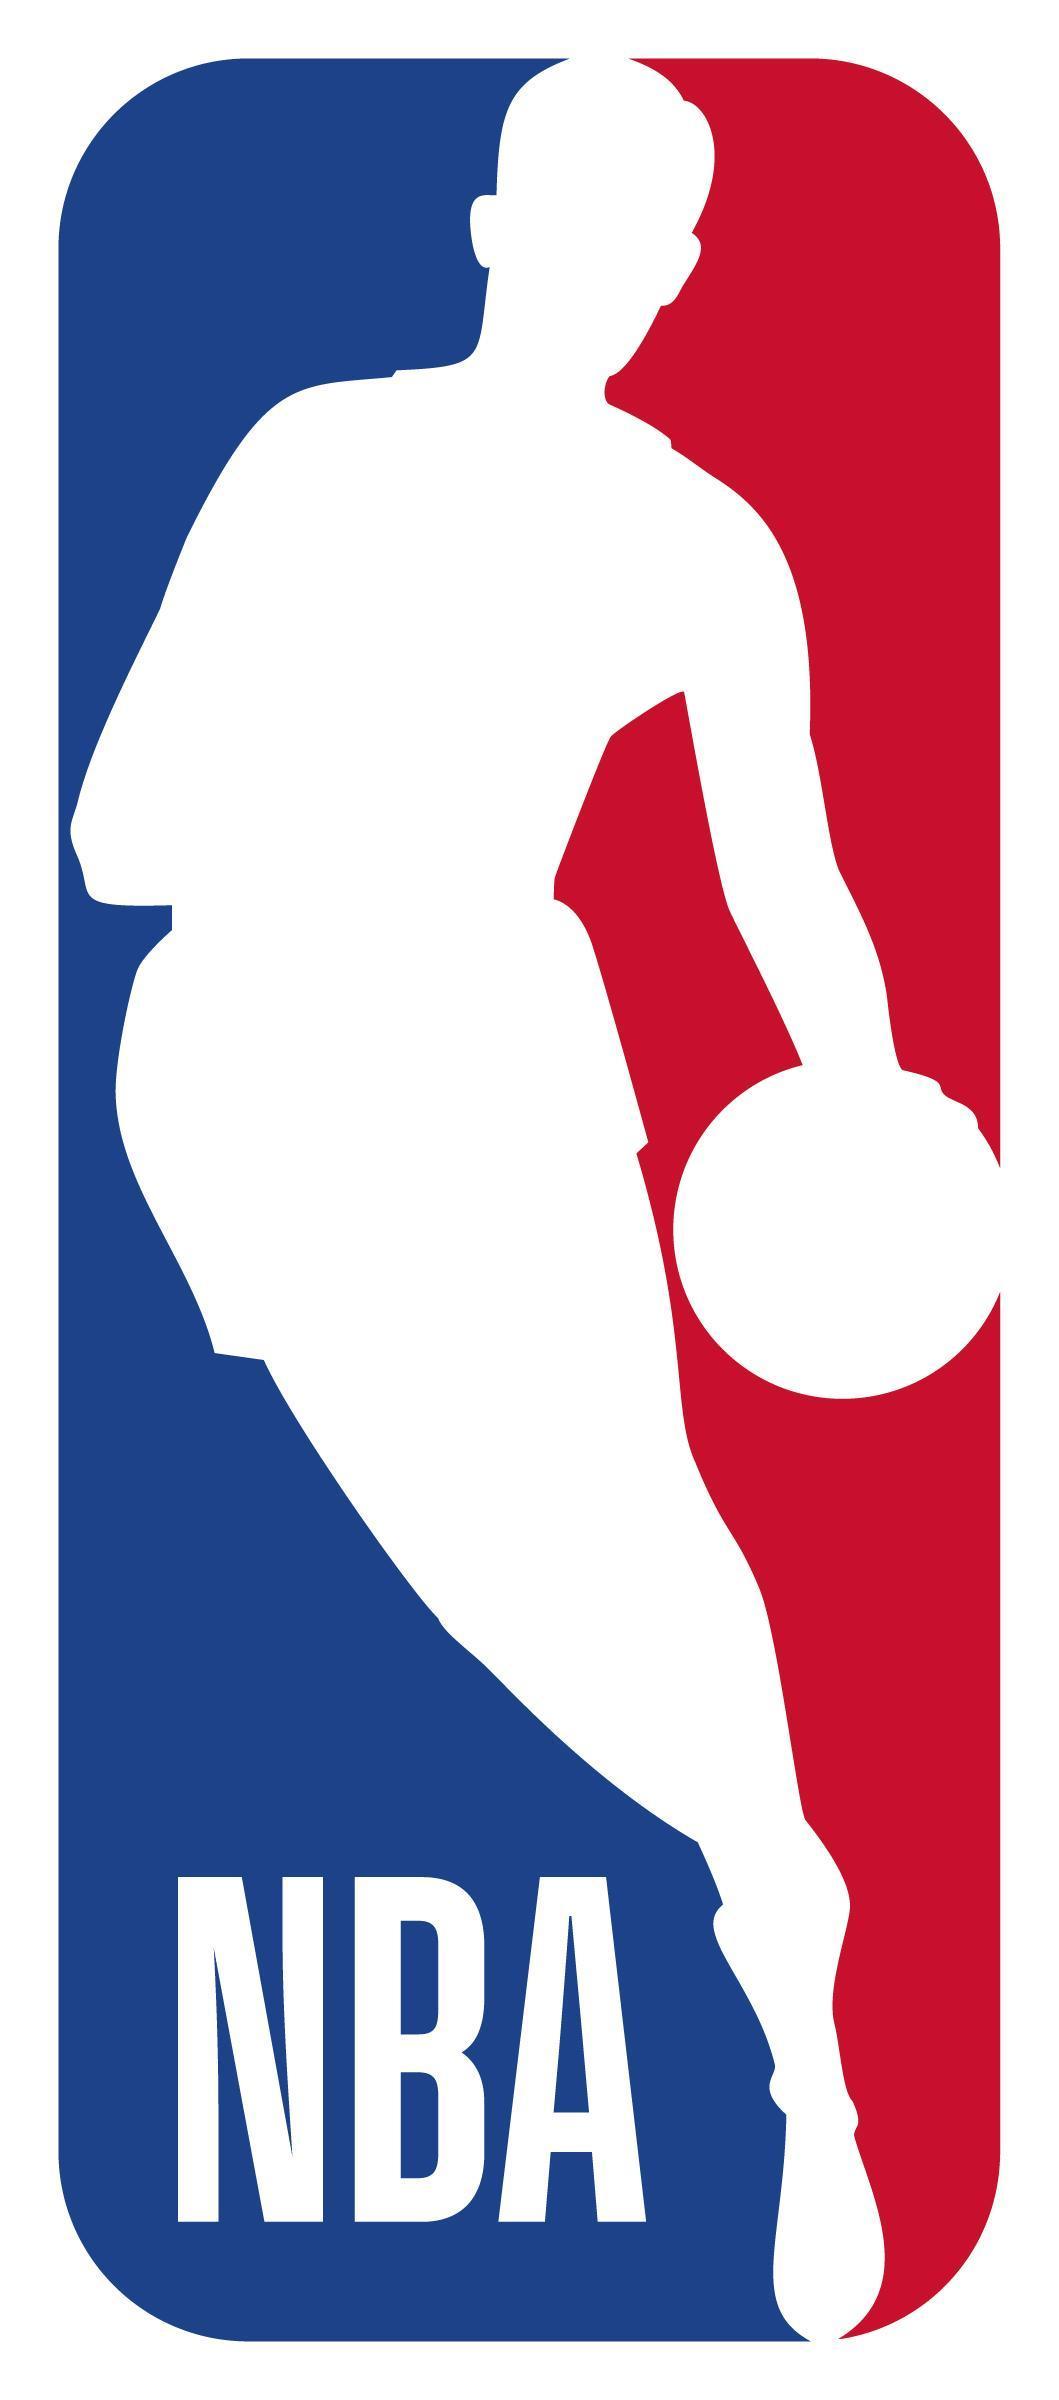 Official NBA Logo - A first look at the NBA's refreshed logo | NBA.com